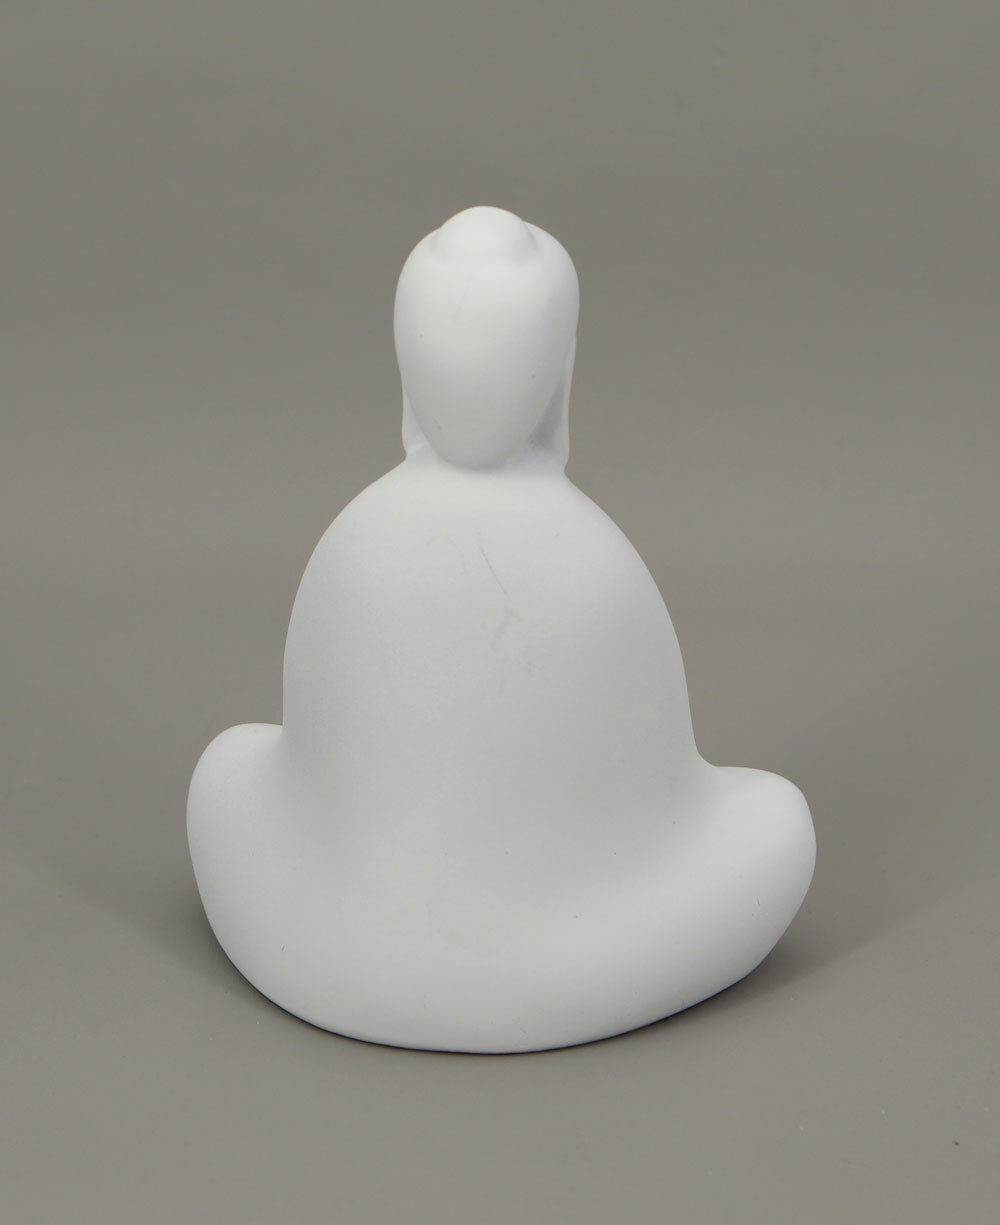 Minimalist Abstract Meditating Buddha Statue in White - Sculptures & Statues